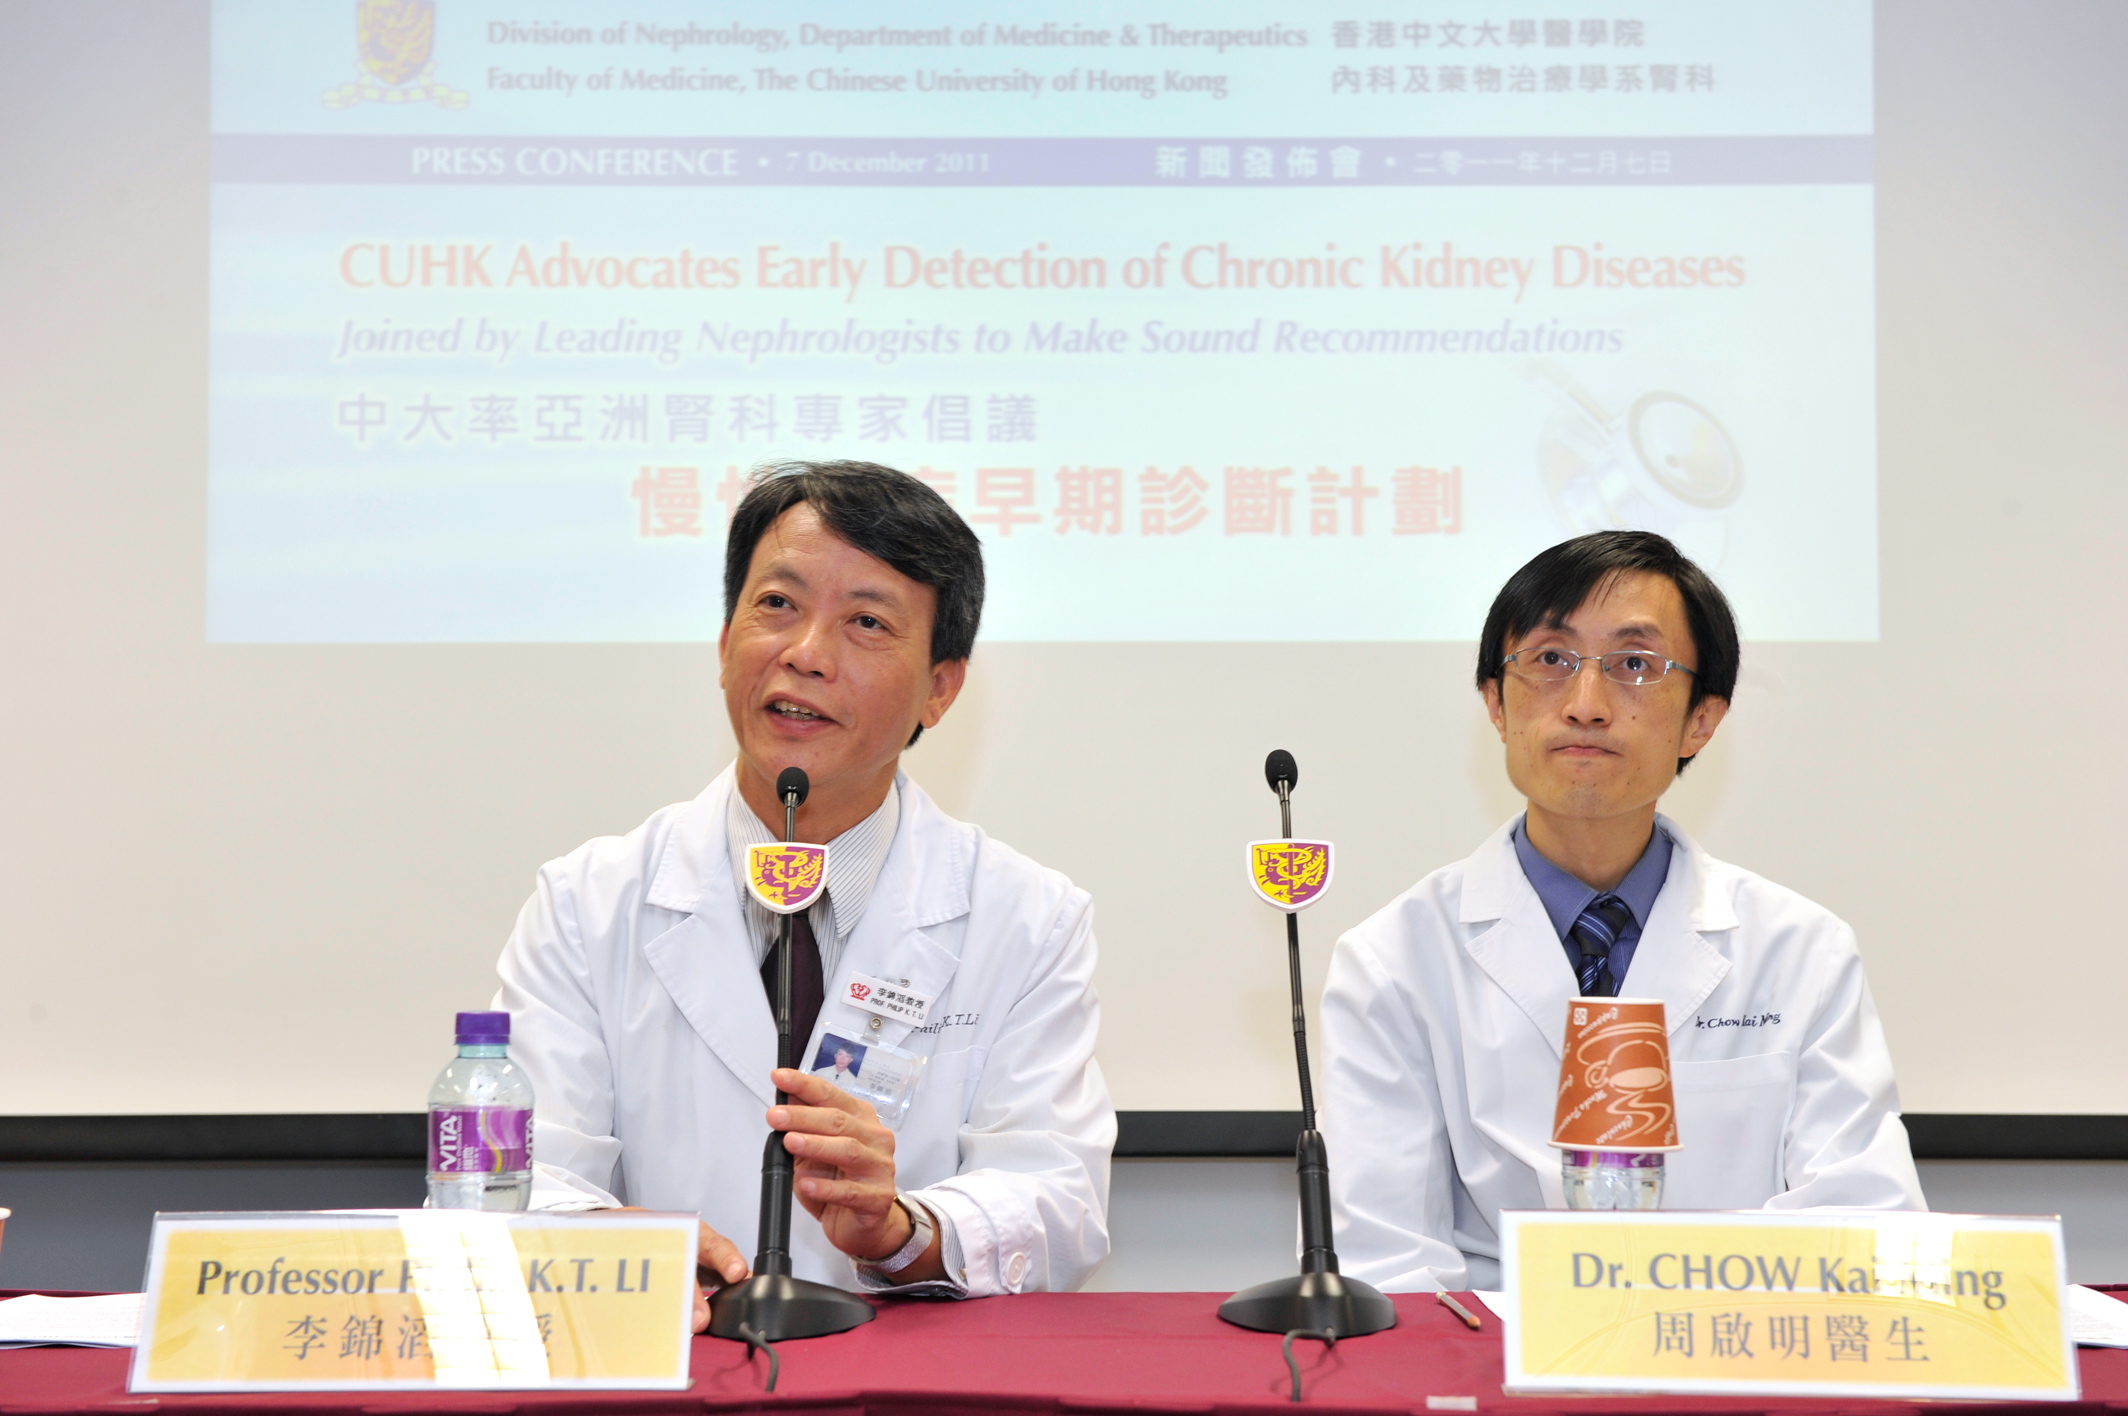 From left: Professor Philip LI, Head of Division of Nephrology and Honorary Professor, and Dr. CHOW Kai Ming, Honorary Clinical Associate Professor, Department of Medicine and Therapeutics, CUHK, have led a group of leading nephrologists in Asia and Asia Pacific, to make recommendations on early detection of chronic kidney diseases.